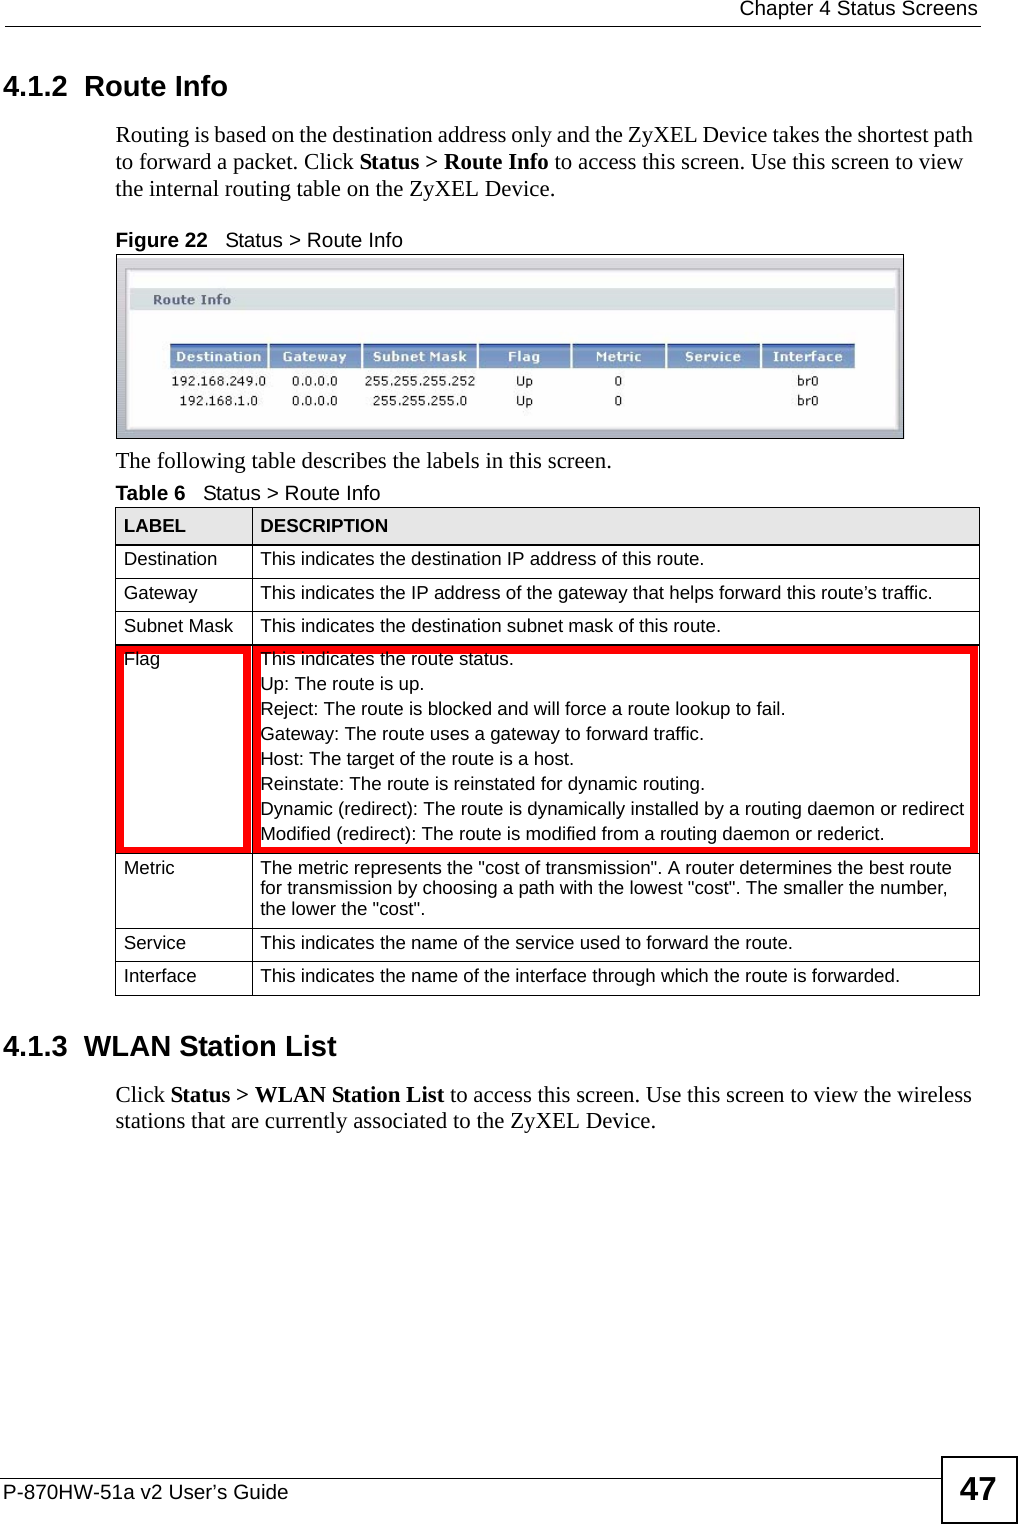  Chapter 4 Status ScreensP-870HW-51a v2 User’s Guide 474.1.2  Route InfoRouting is based on the destination address only and the ZyXEL Device takes the shortest path to forward a packet. Click Status &gt; Route Info to access this screen. Use this screen to view the internal routing table on the ZyXEL Device.Figure 22   Status &gt; Route Info The following table describes the labels in this screen. 4.1.3  WLAN Station ListClick Status &gt; WLAN Station List to access this screen. Use this screen to view the wireless stations that are currently associated to the ZyXEL Device.Table 6   Status &gt; Route InfoLABEL DESCRIPTIONDestination This indicates the destination IP address of this route.Gateway This indicates the IP address of the gateway that helps forward this route’s traffic.Subnet Mask This indicates the destination subnet mask of this route.Flag This indicates the route status.Up: The route is up.Reject: The route is blocked and will force a route lookup to fail.Gateway: The route uses a gateway to forward traffic.Host: The target of the route is a host.Reinstate: The route is reinstated for dynamic routing.Dynamic (redirect): The route is dynamically installed by a routing daemon or redirectModified (redirect): The route is modified from a routing daemon or rederict.Metric The metric represents the &quot;cost of transmission&quot;. A router determines the best route for transmission by choosing a path with the lowest &quot;cost&quot;. The smaller the number, the lower the &quot;cost&quot;.Service This indicates the name of the service used to forward the route.Interface This indicates the name of the interface through which the route is forwarded.